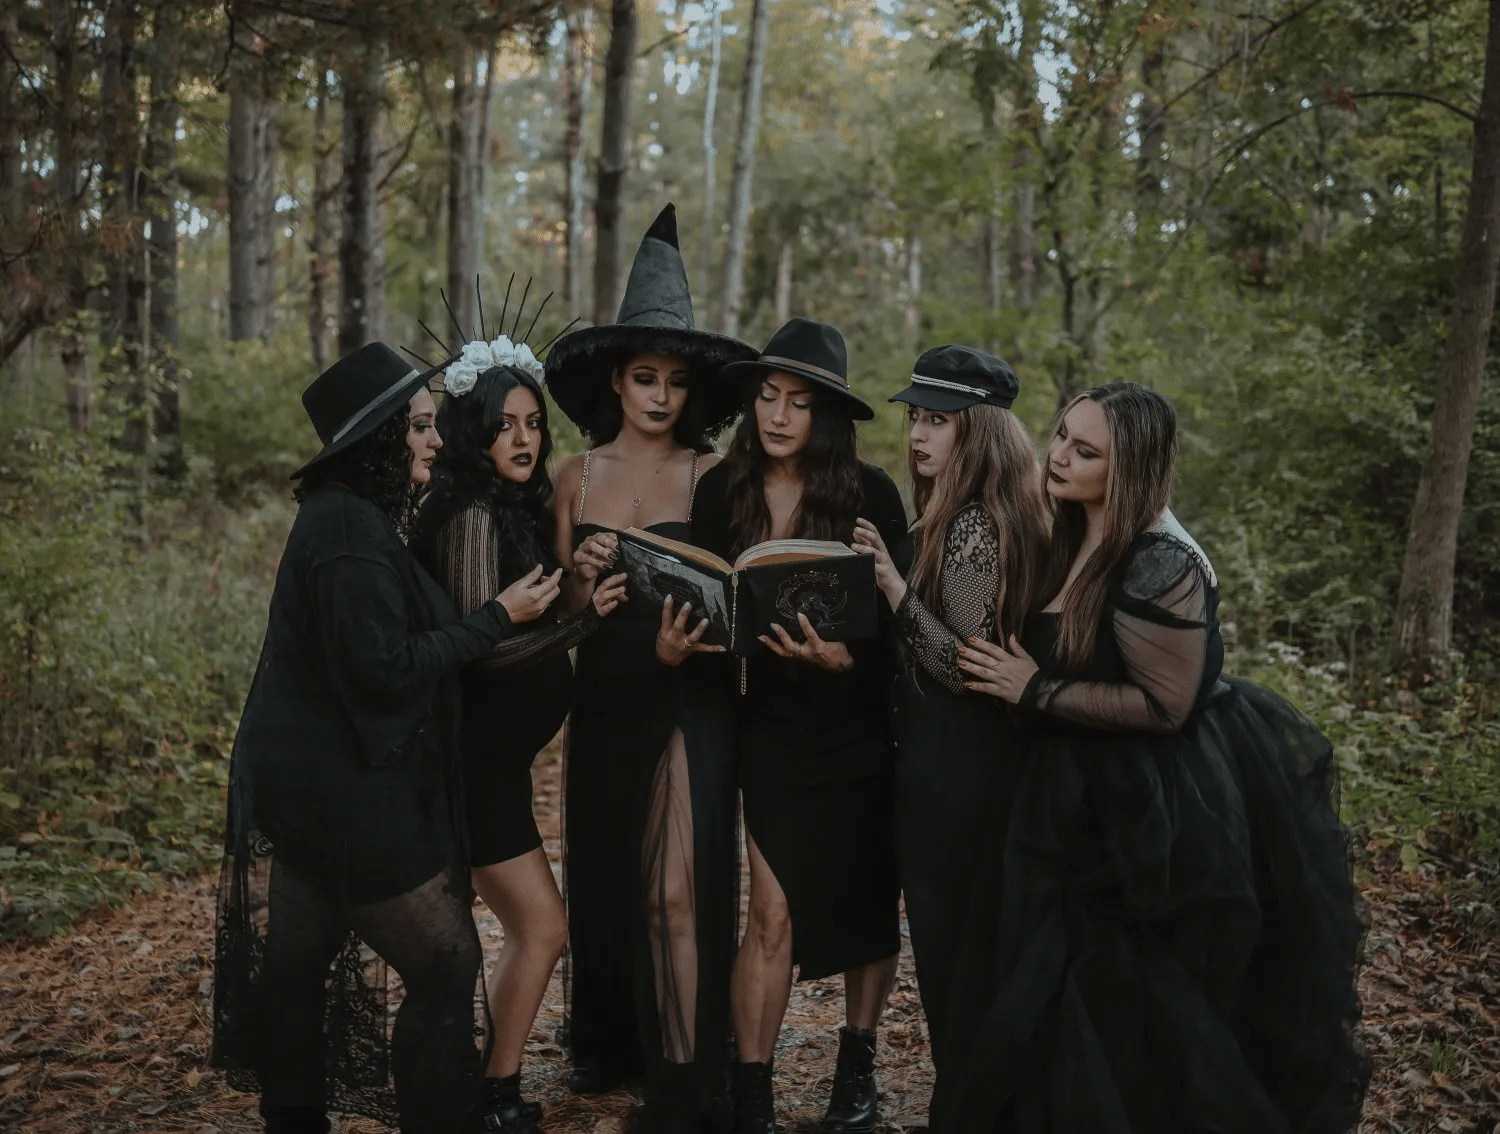 Halloween-themed photoshoot for friends in witch costumes